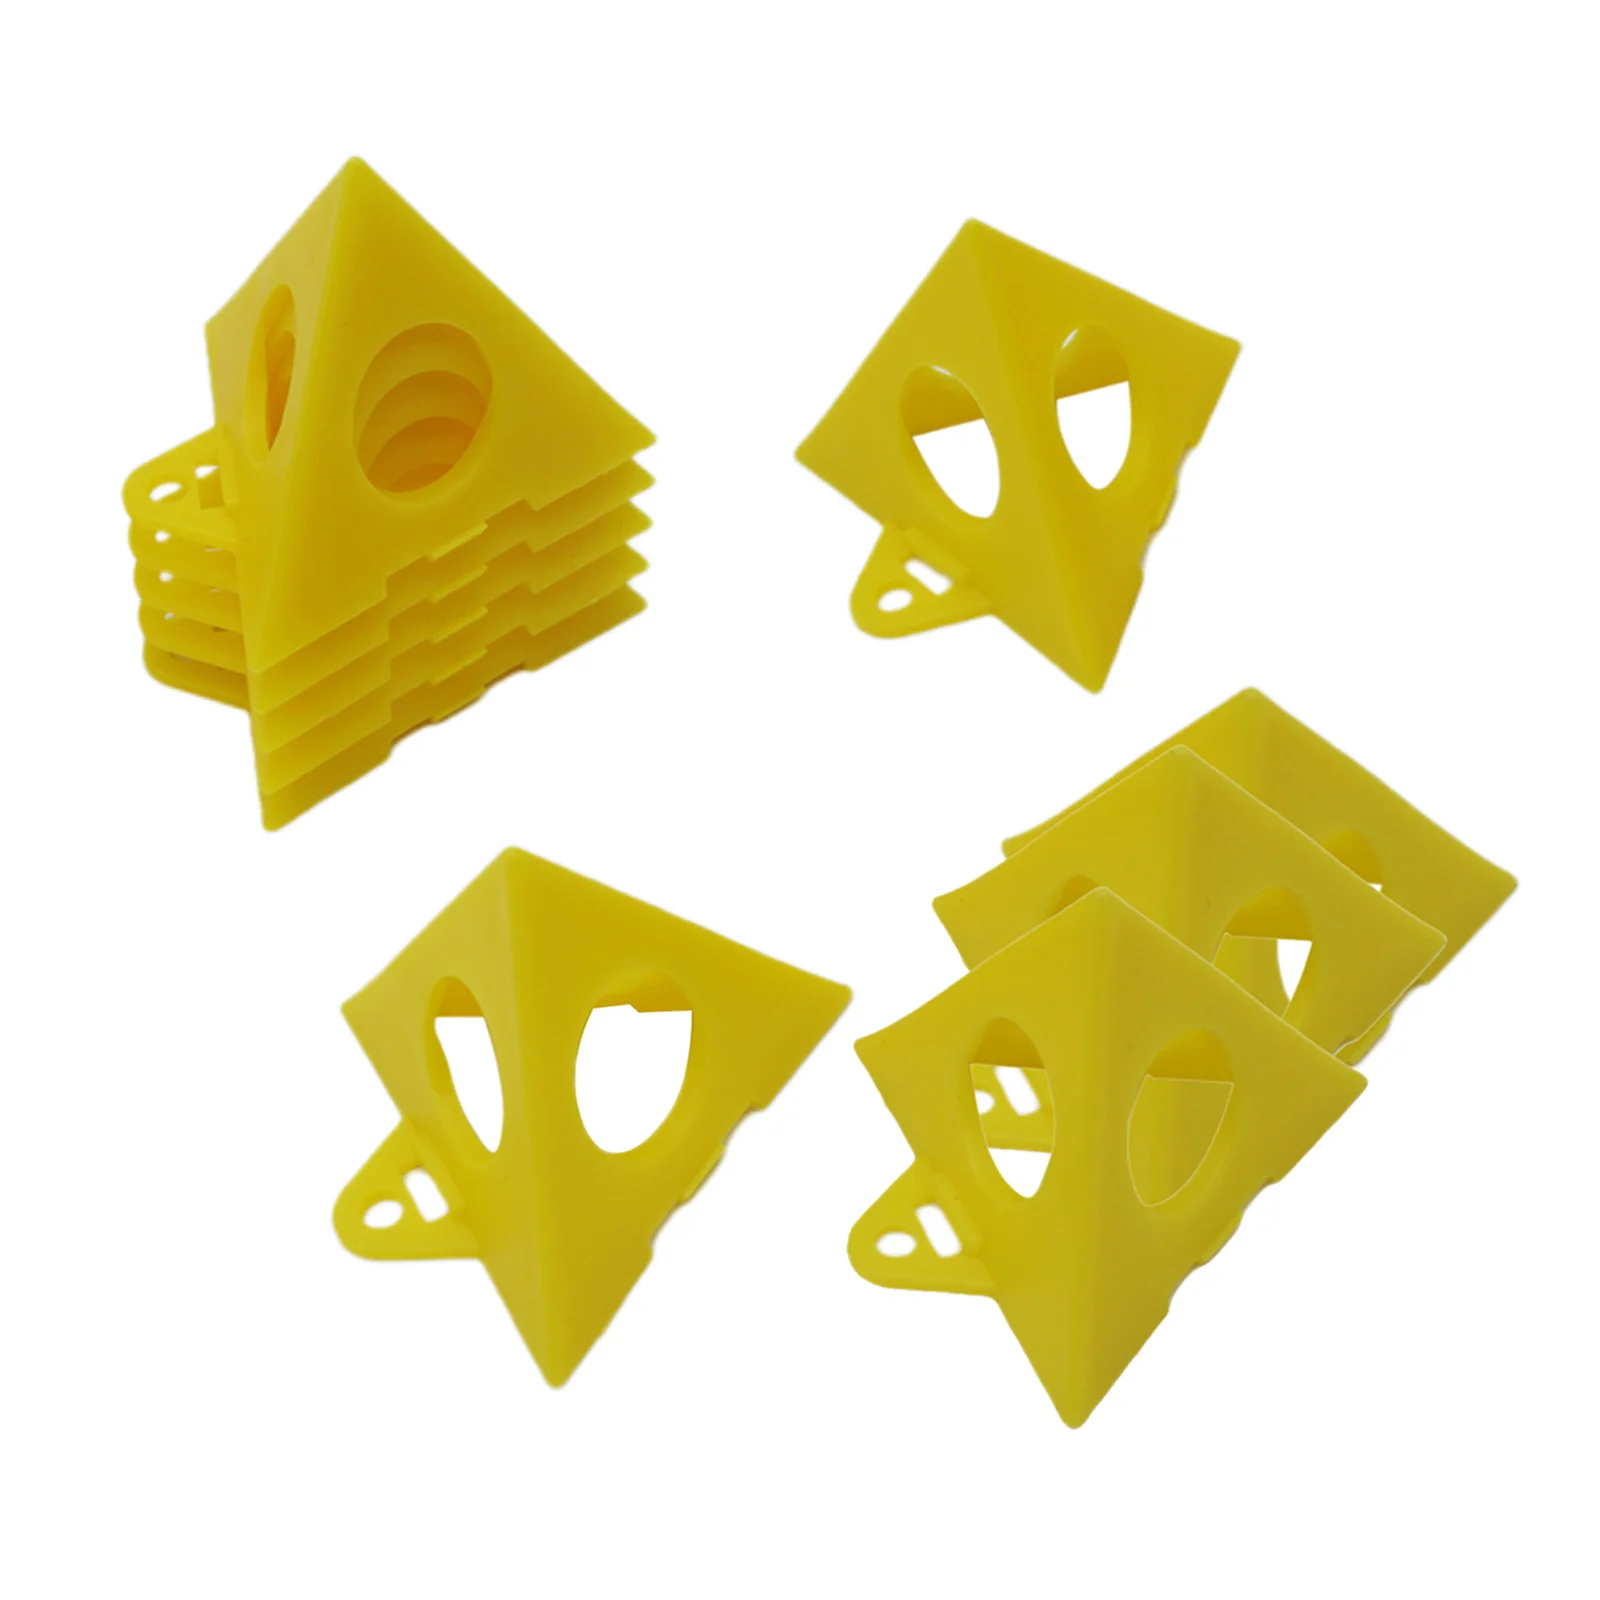 10 Pcs Cabinet Door Risers Acrylic Pouring Paint Canvas Support Stands Yellow, No Mess